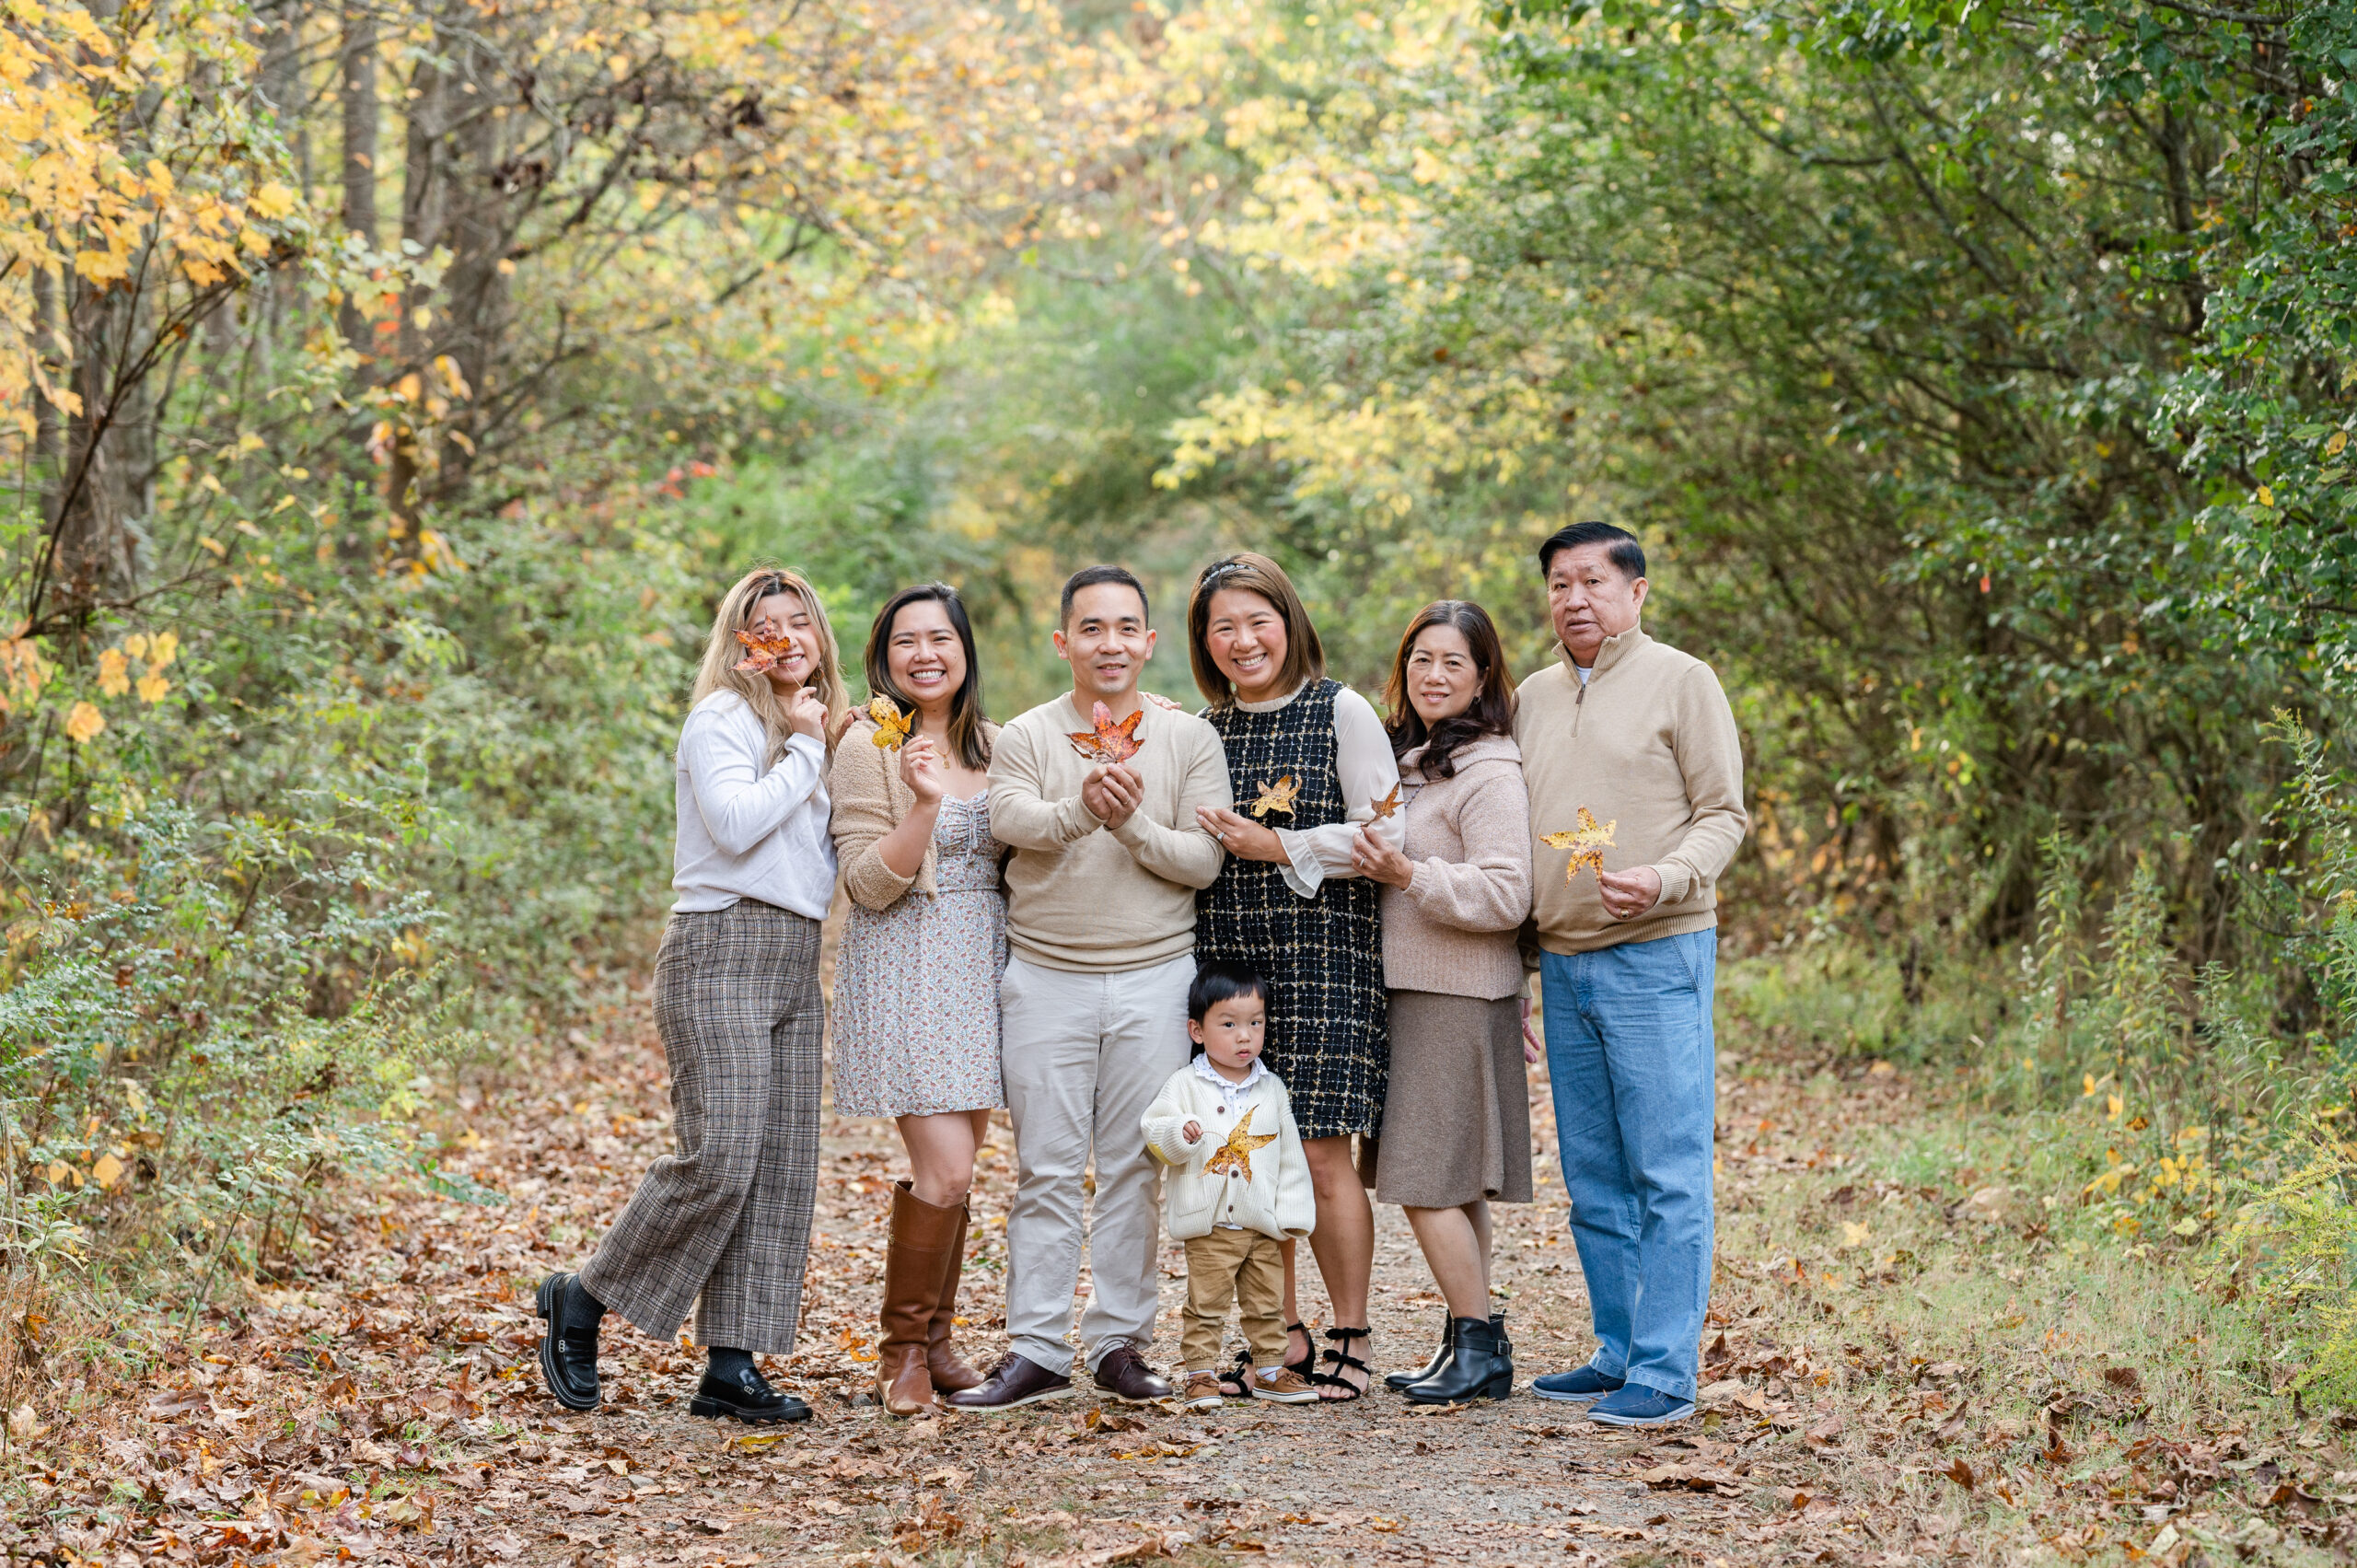 The Chadwick Family – Amy Salessi Photography